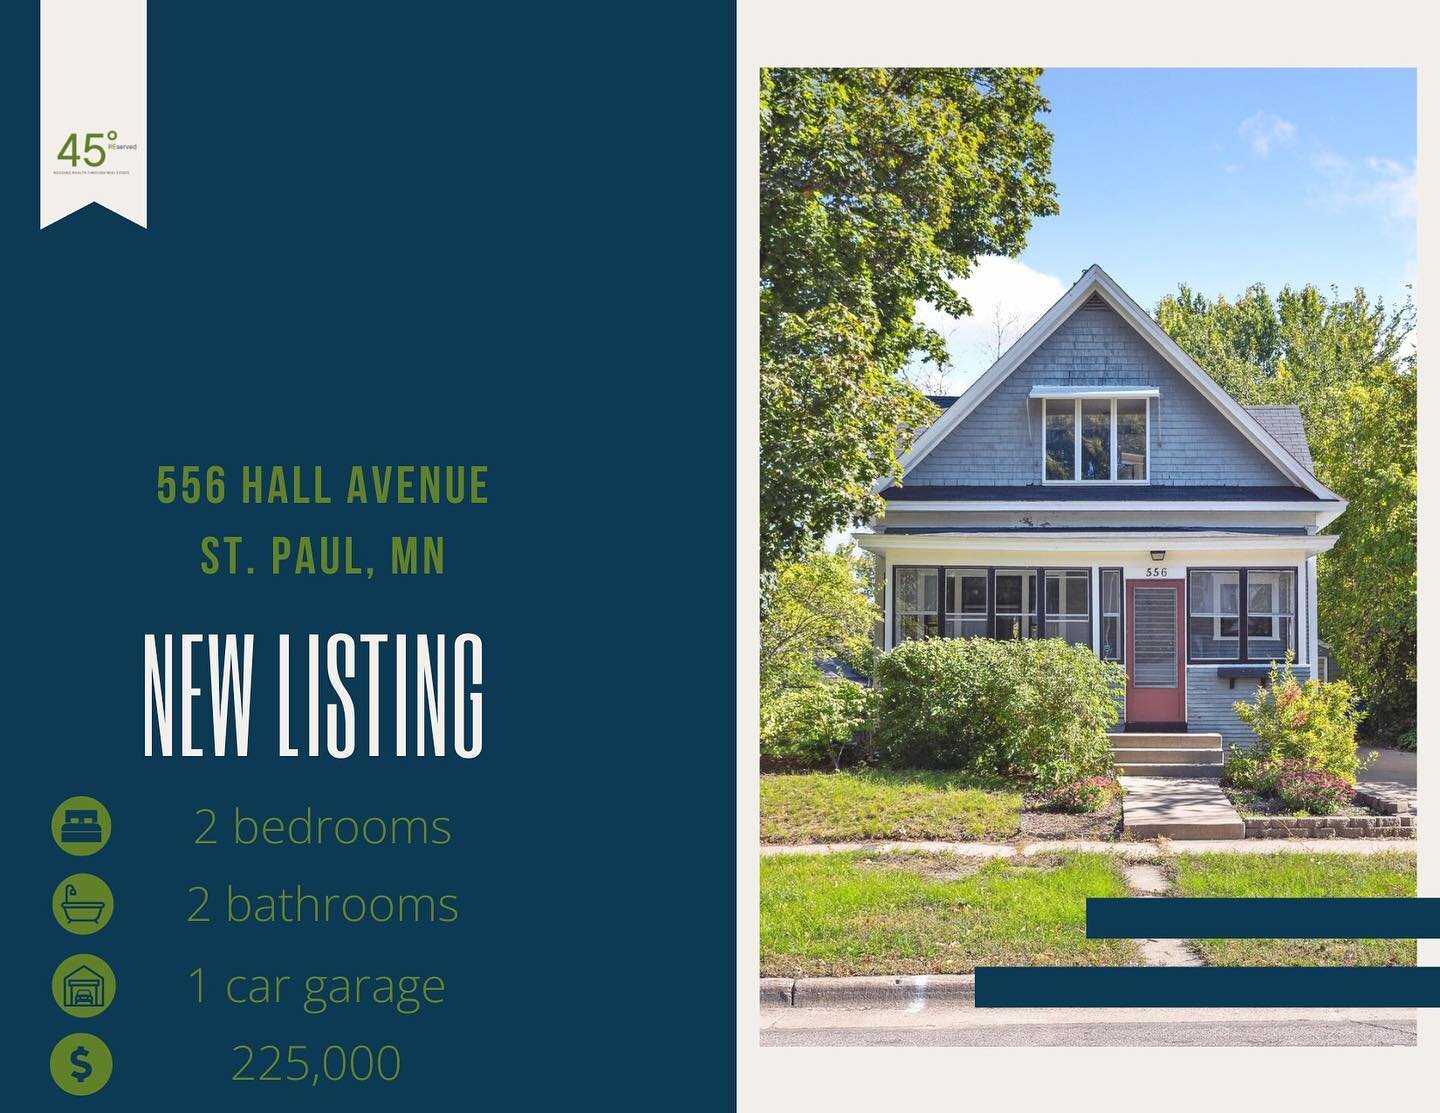 Fresh to the market we have this darling home in St. Paul! 

📍556 Hall Avenue 
🛏️ 2 bedrooms
🛁 2 bathrooms 
🚘 1 car garage 
💰 $225,000

Reach out today to grab a tour! 

#stpaul #stpaulliving #stpaulrealestate #mplsrealestate #homesforsale #home